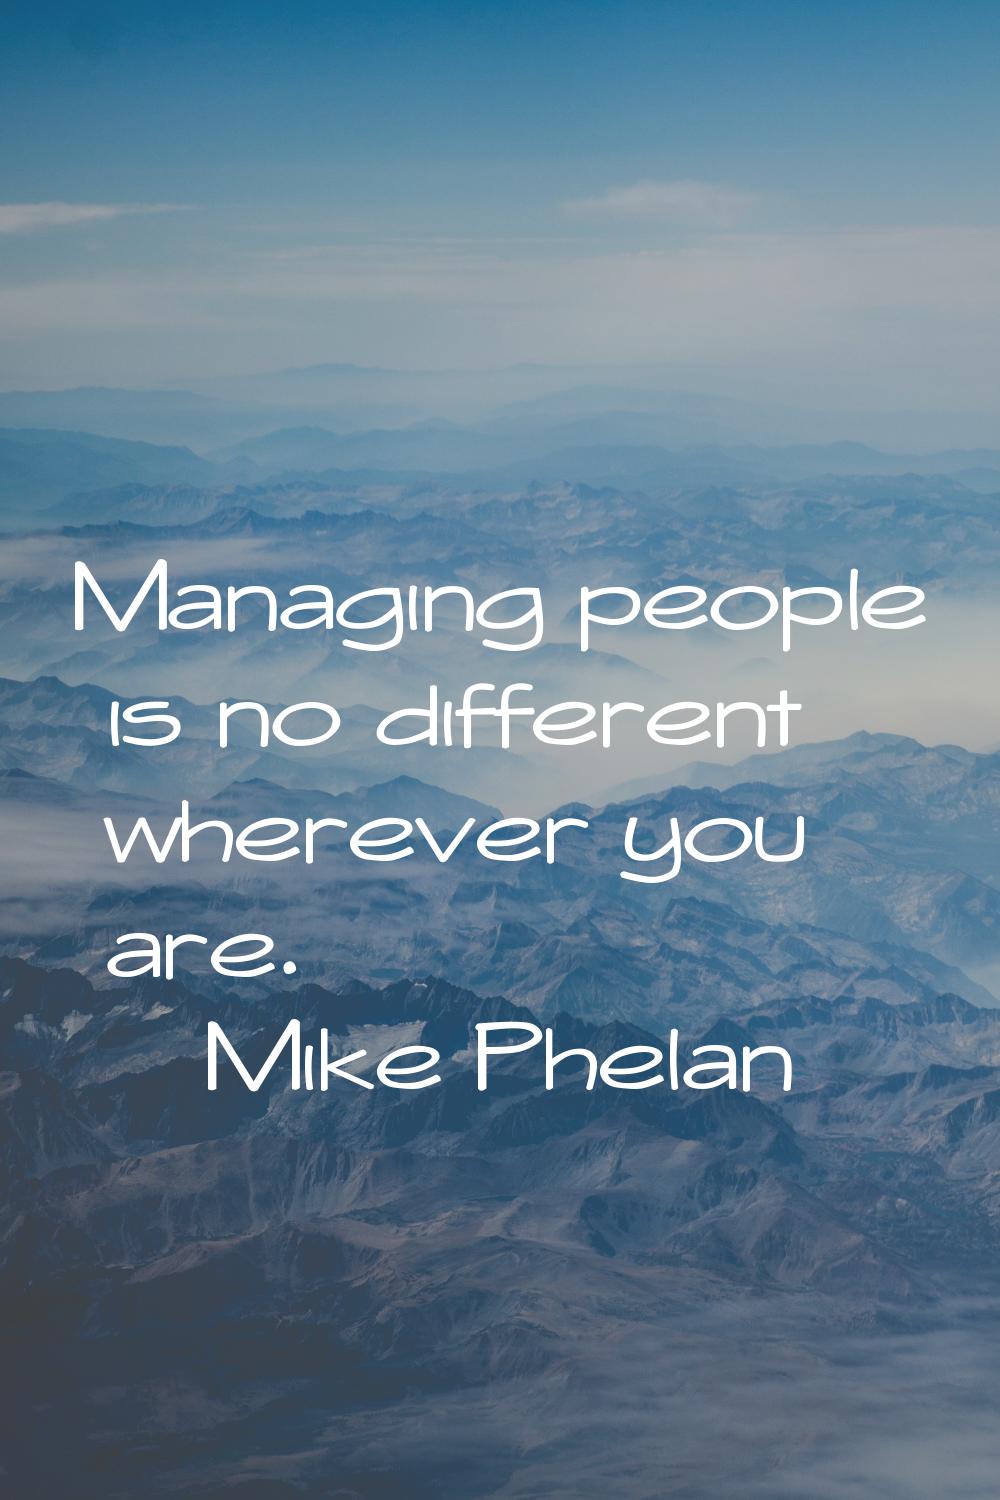 Managing people is no different wherever you are.